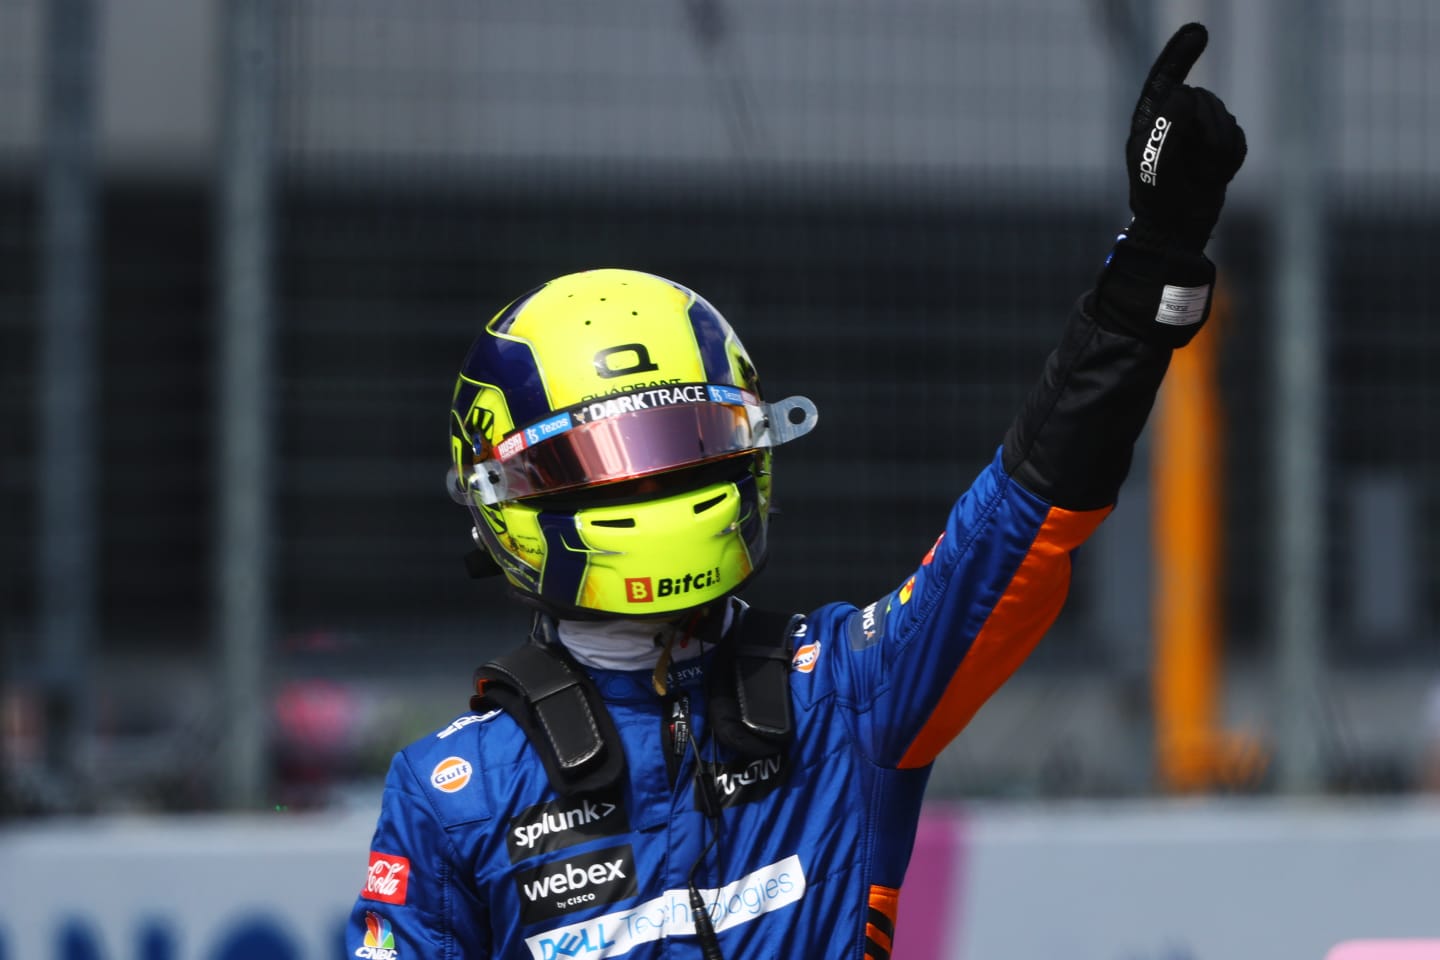 SPIELBERG, AUSTRIA - JULY 03: Second place qualifier Lando Norris of Great Britain and McLaren F1 celebrates in parc ferme during qualifying ahead of the F1 Grand Prix of Austria at Red Bull Ring on July 03, 2021 in Spielberg, Austria. (Photo by Bryn Lennon/Getty Images)